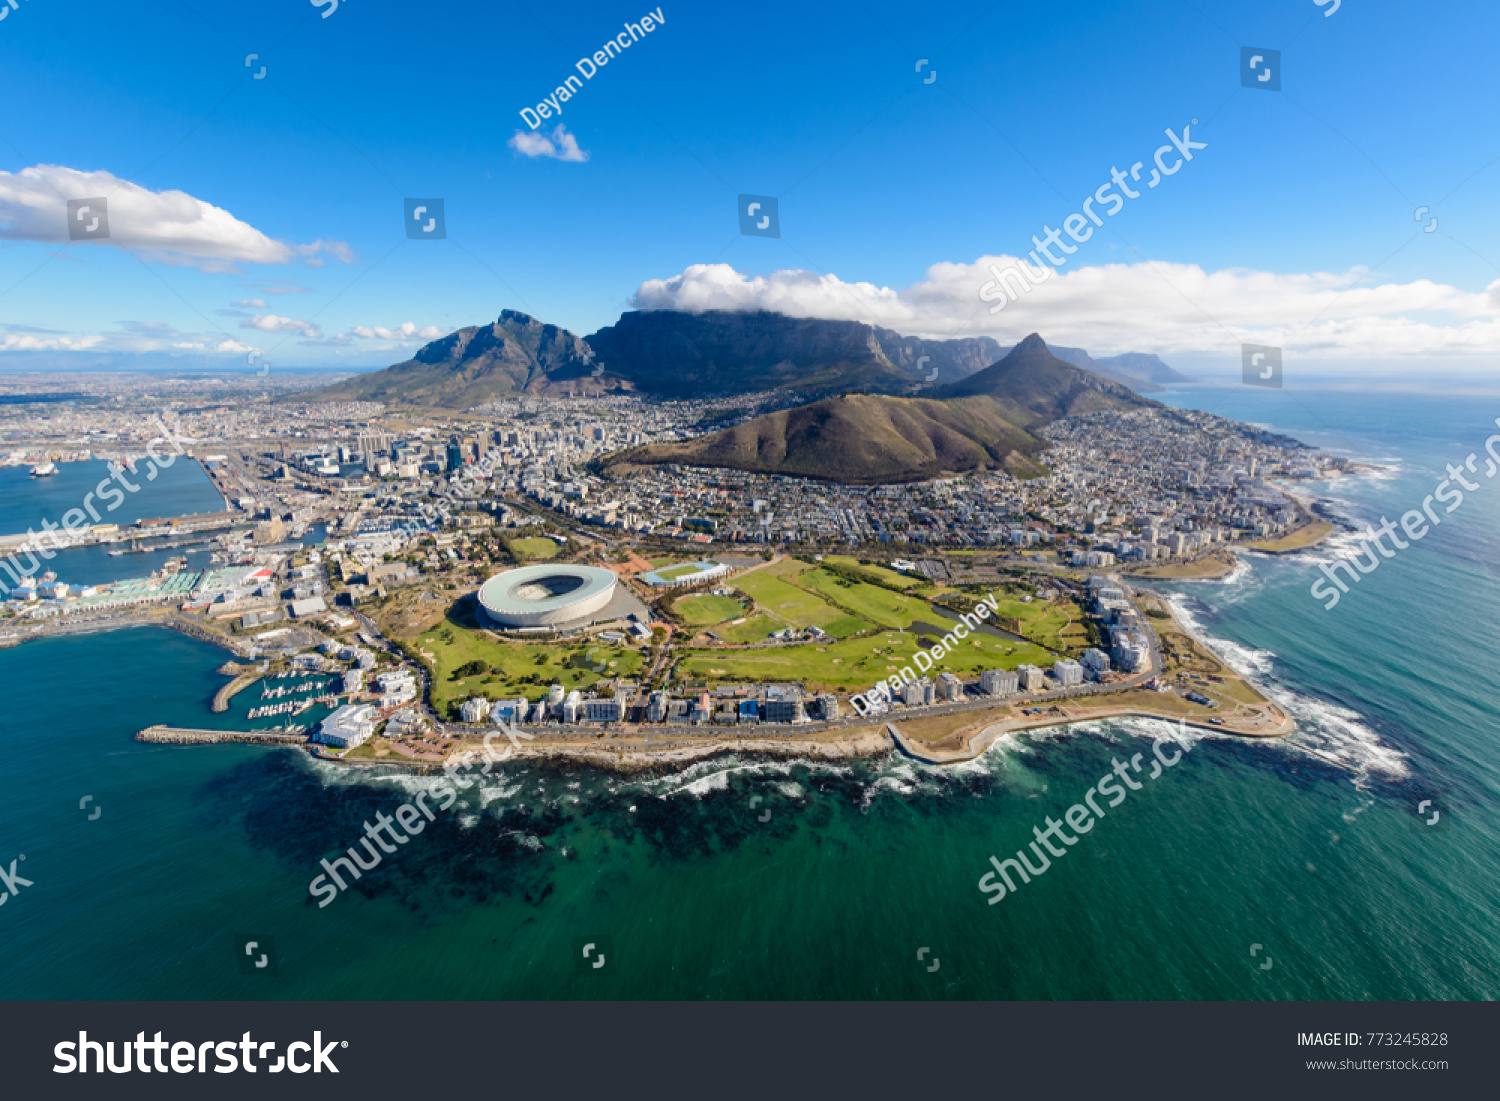 Aerial view of Cape Town, South Africa on a sunny afternoon. Photo taken from a helicopter during air tour of Cape Town #773245828